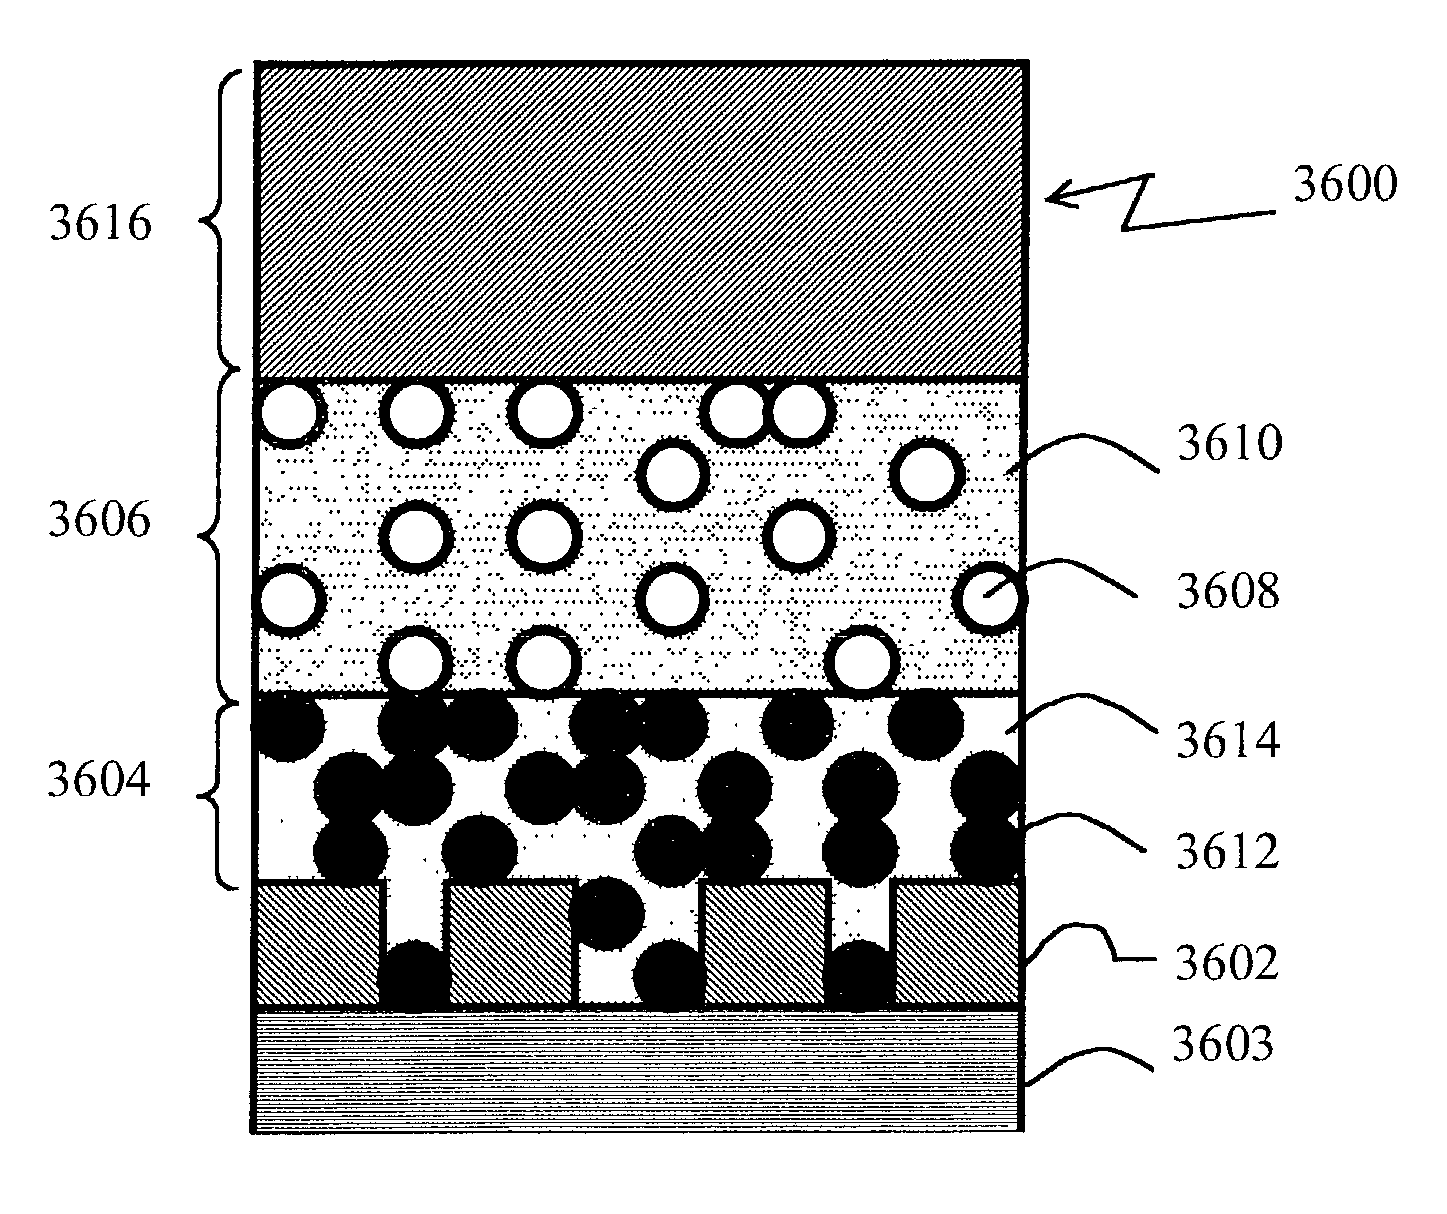 Metal-air battery components and methods for making same